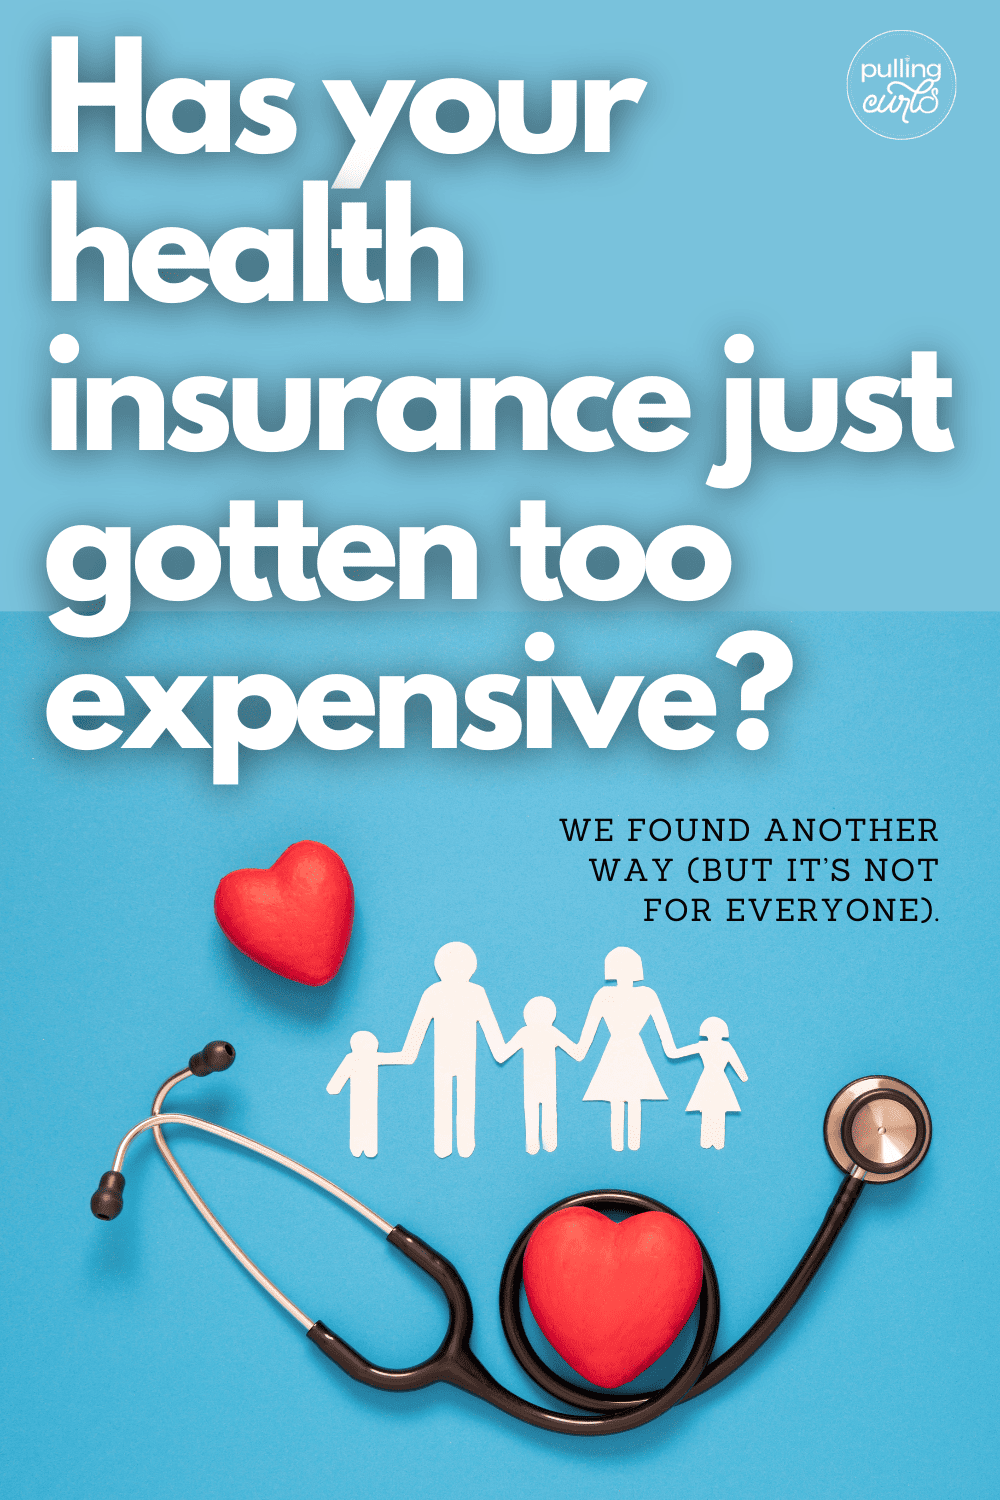 stethascope and a family / has your health insurance just gotten too expensive? via @pullingcurls